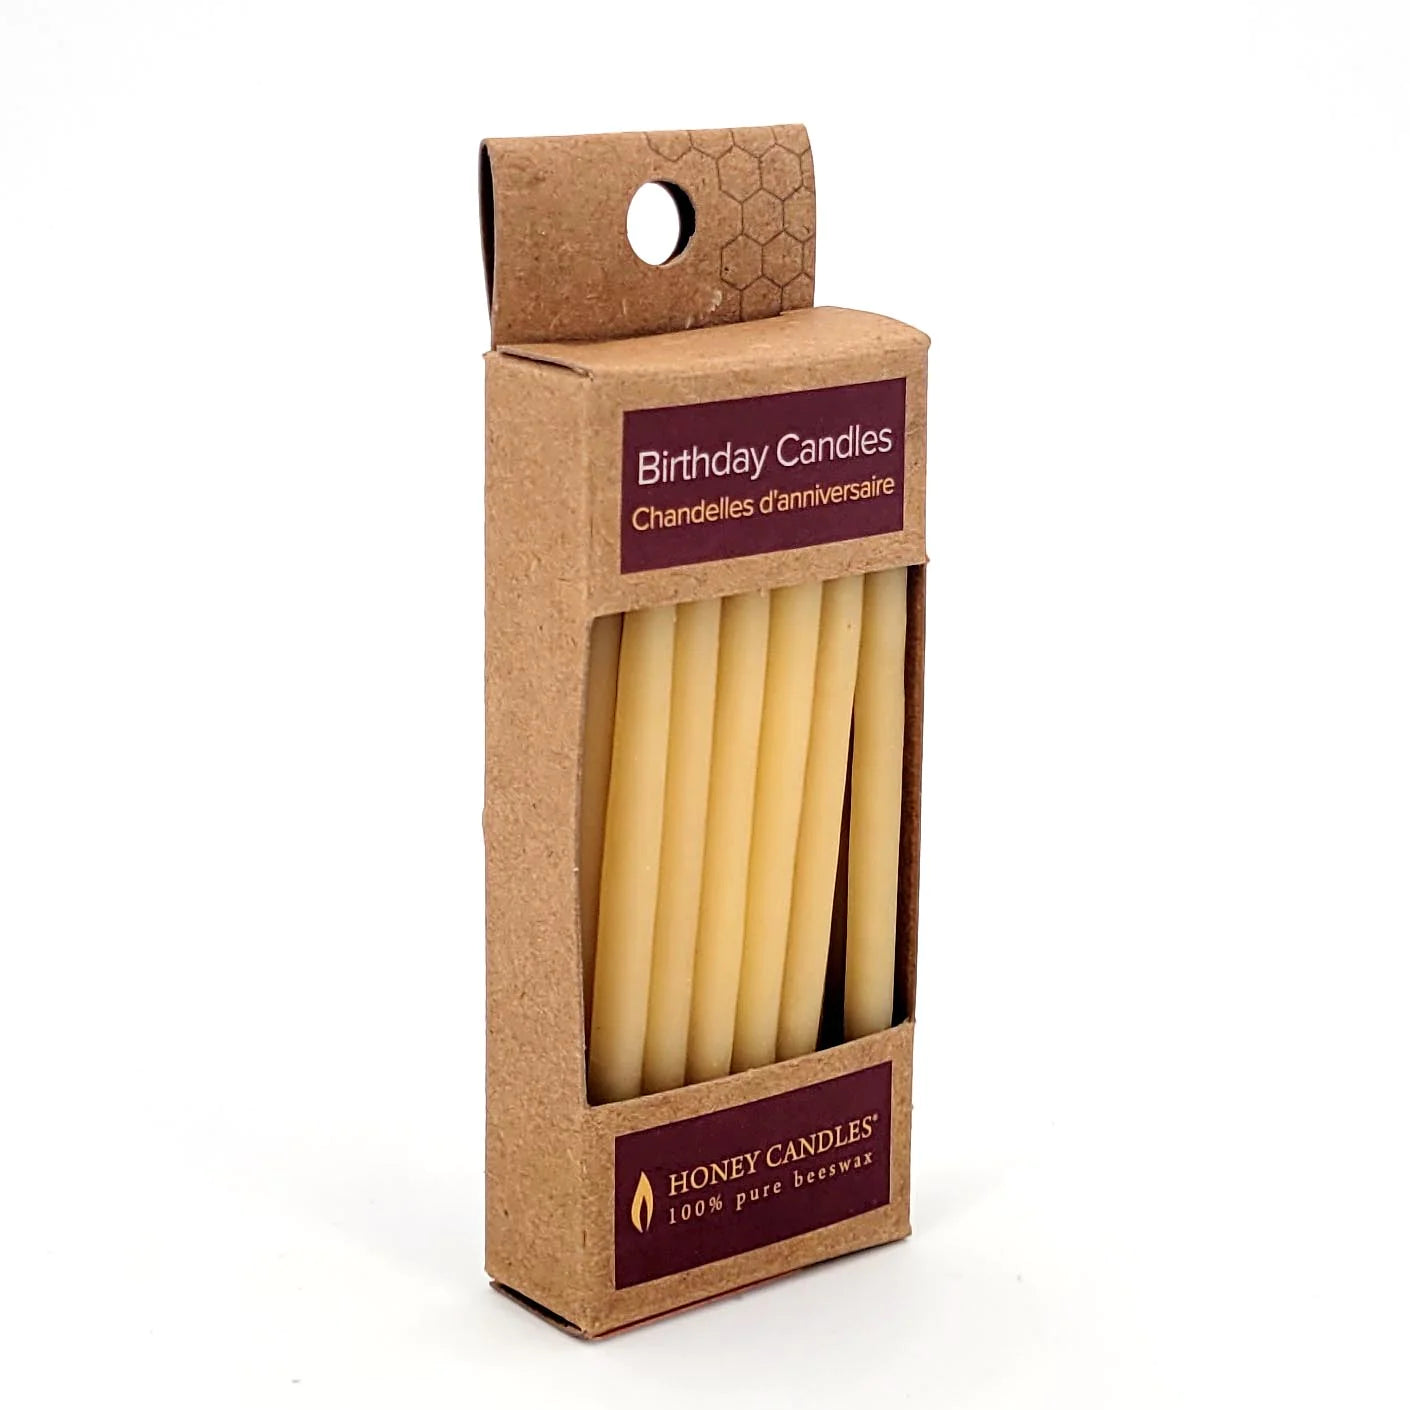 Beeswax Birthday Candles (pack of 20) by Honey Candles